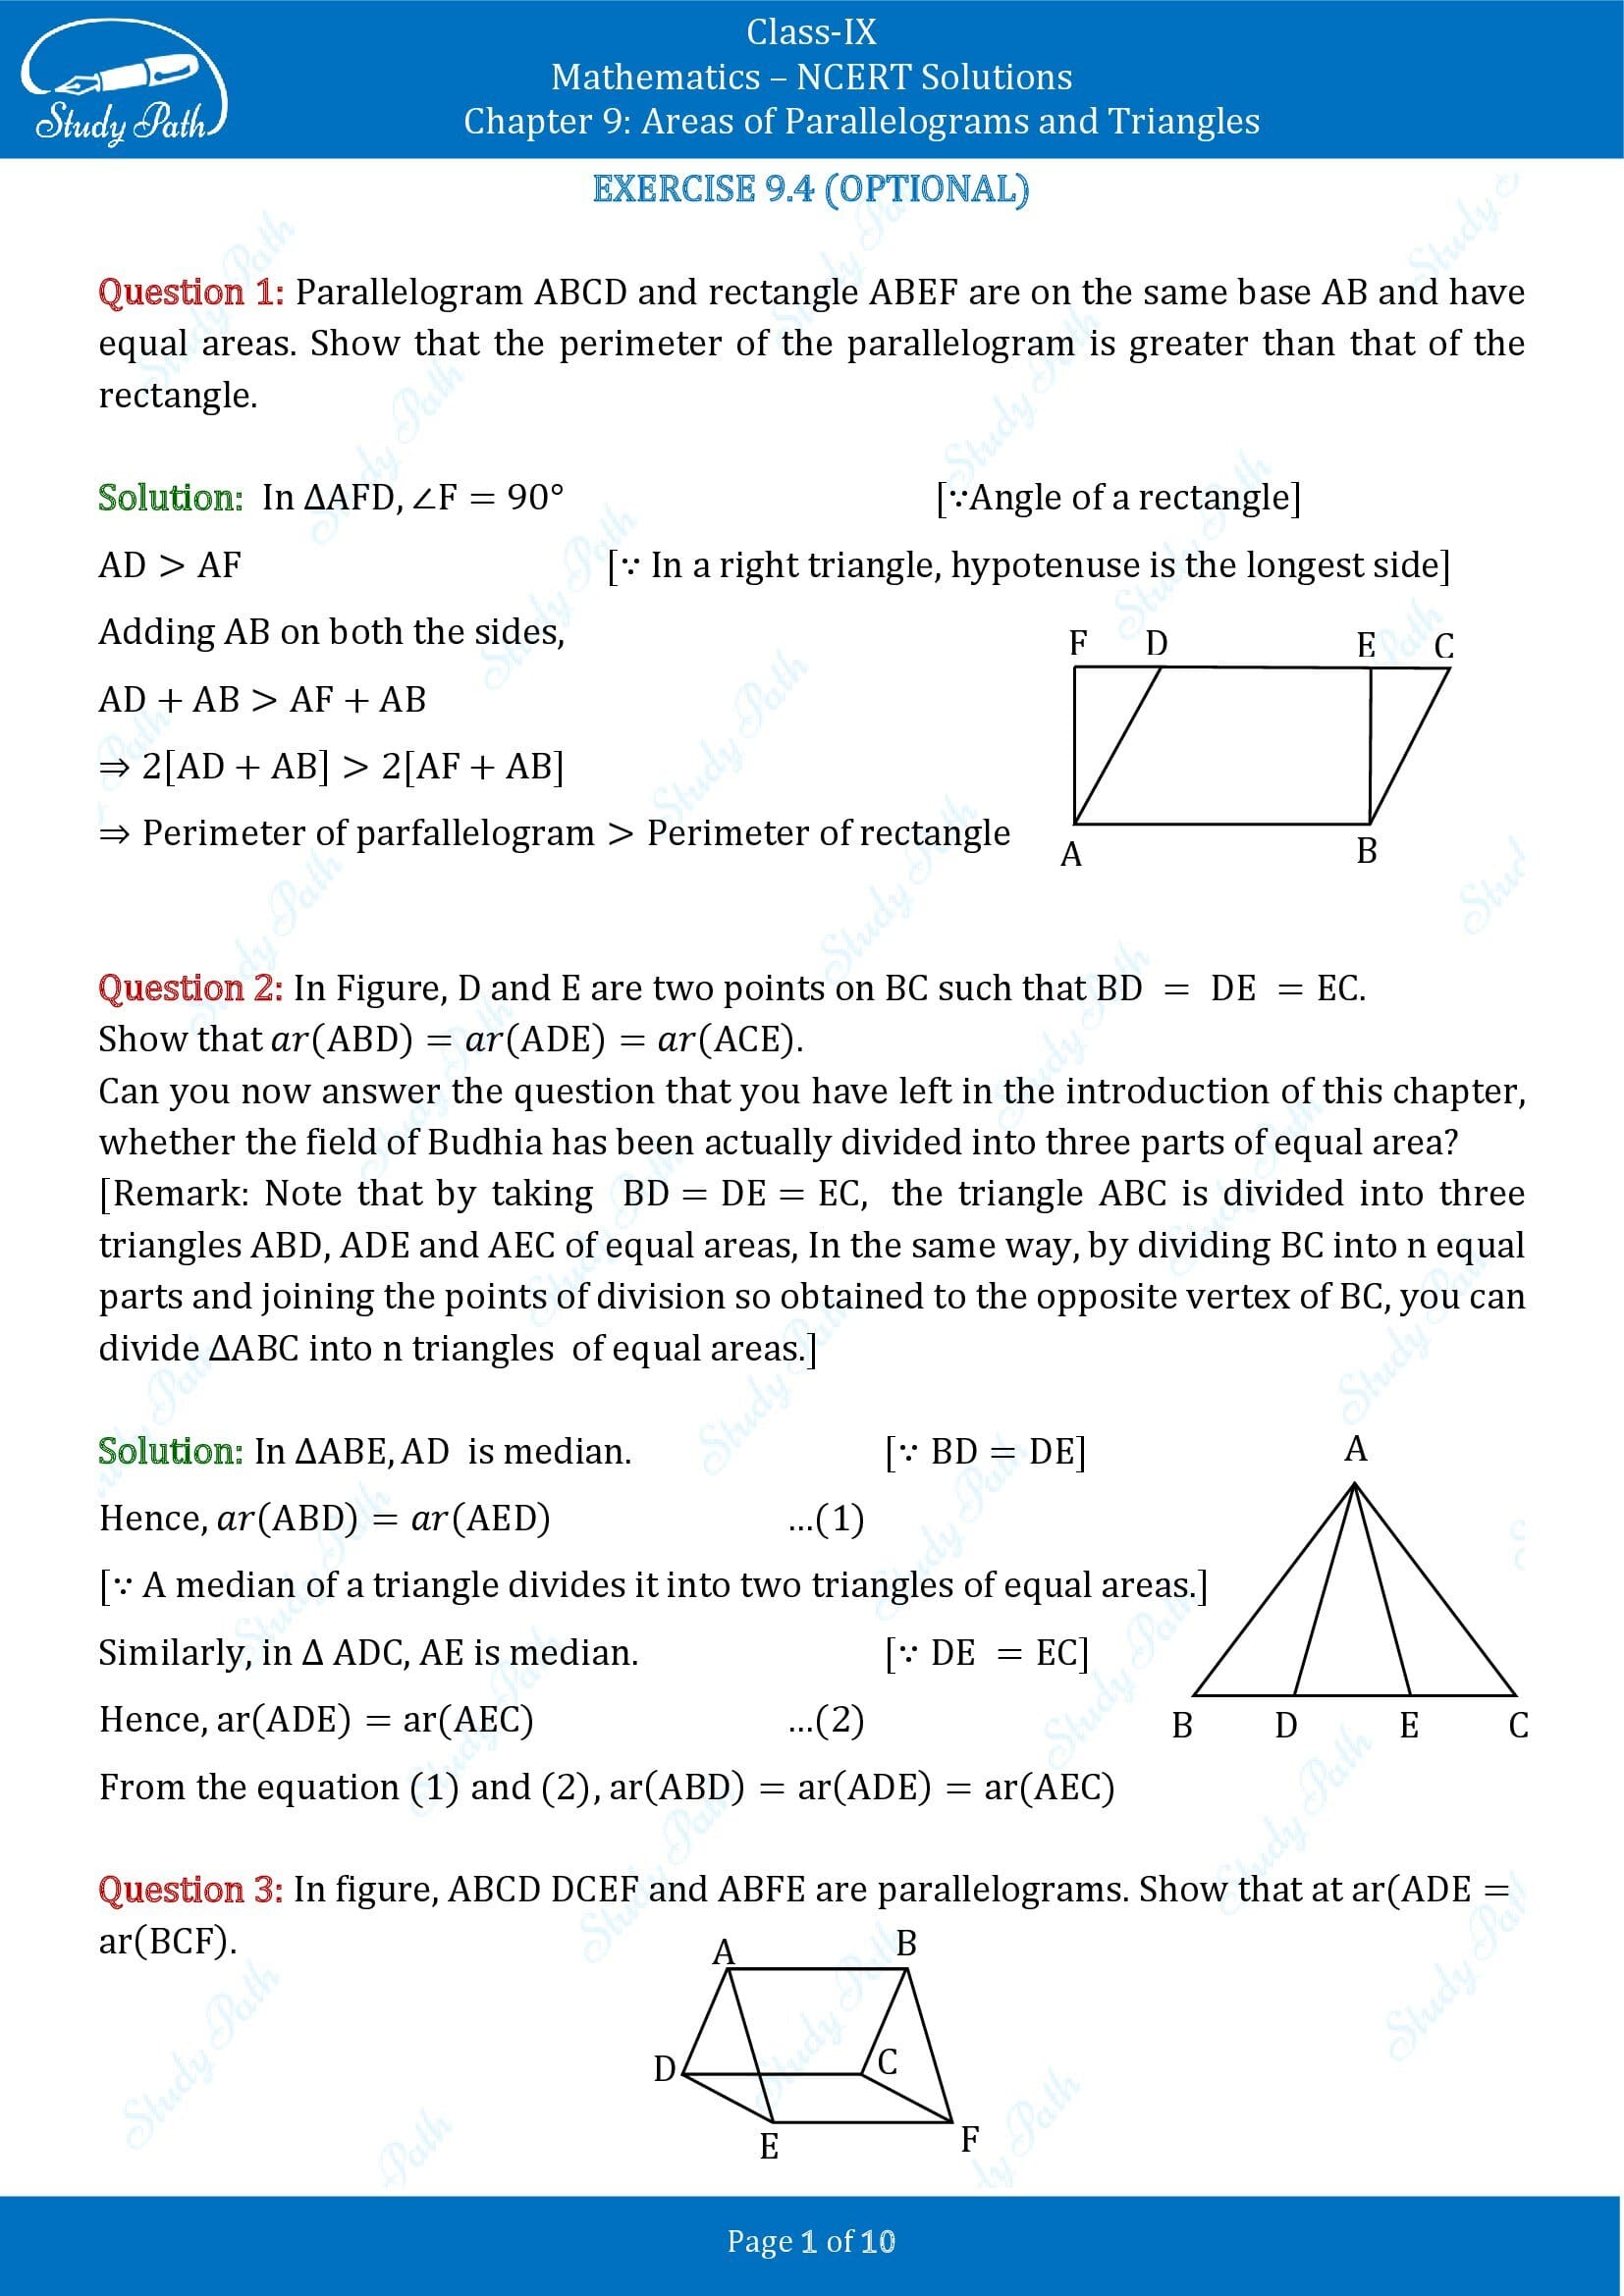 NCERT Solutions for Class 9 Maths Chapter 9 Areas of Parallelograms and Triangles Exercise 9.4 00001